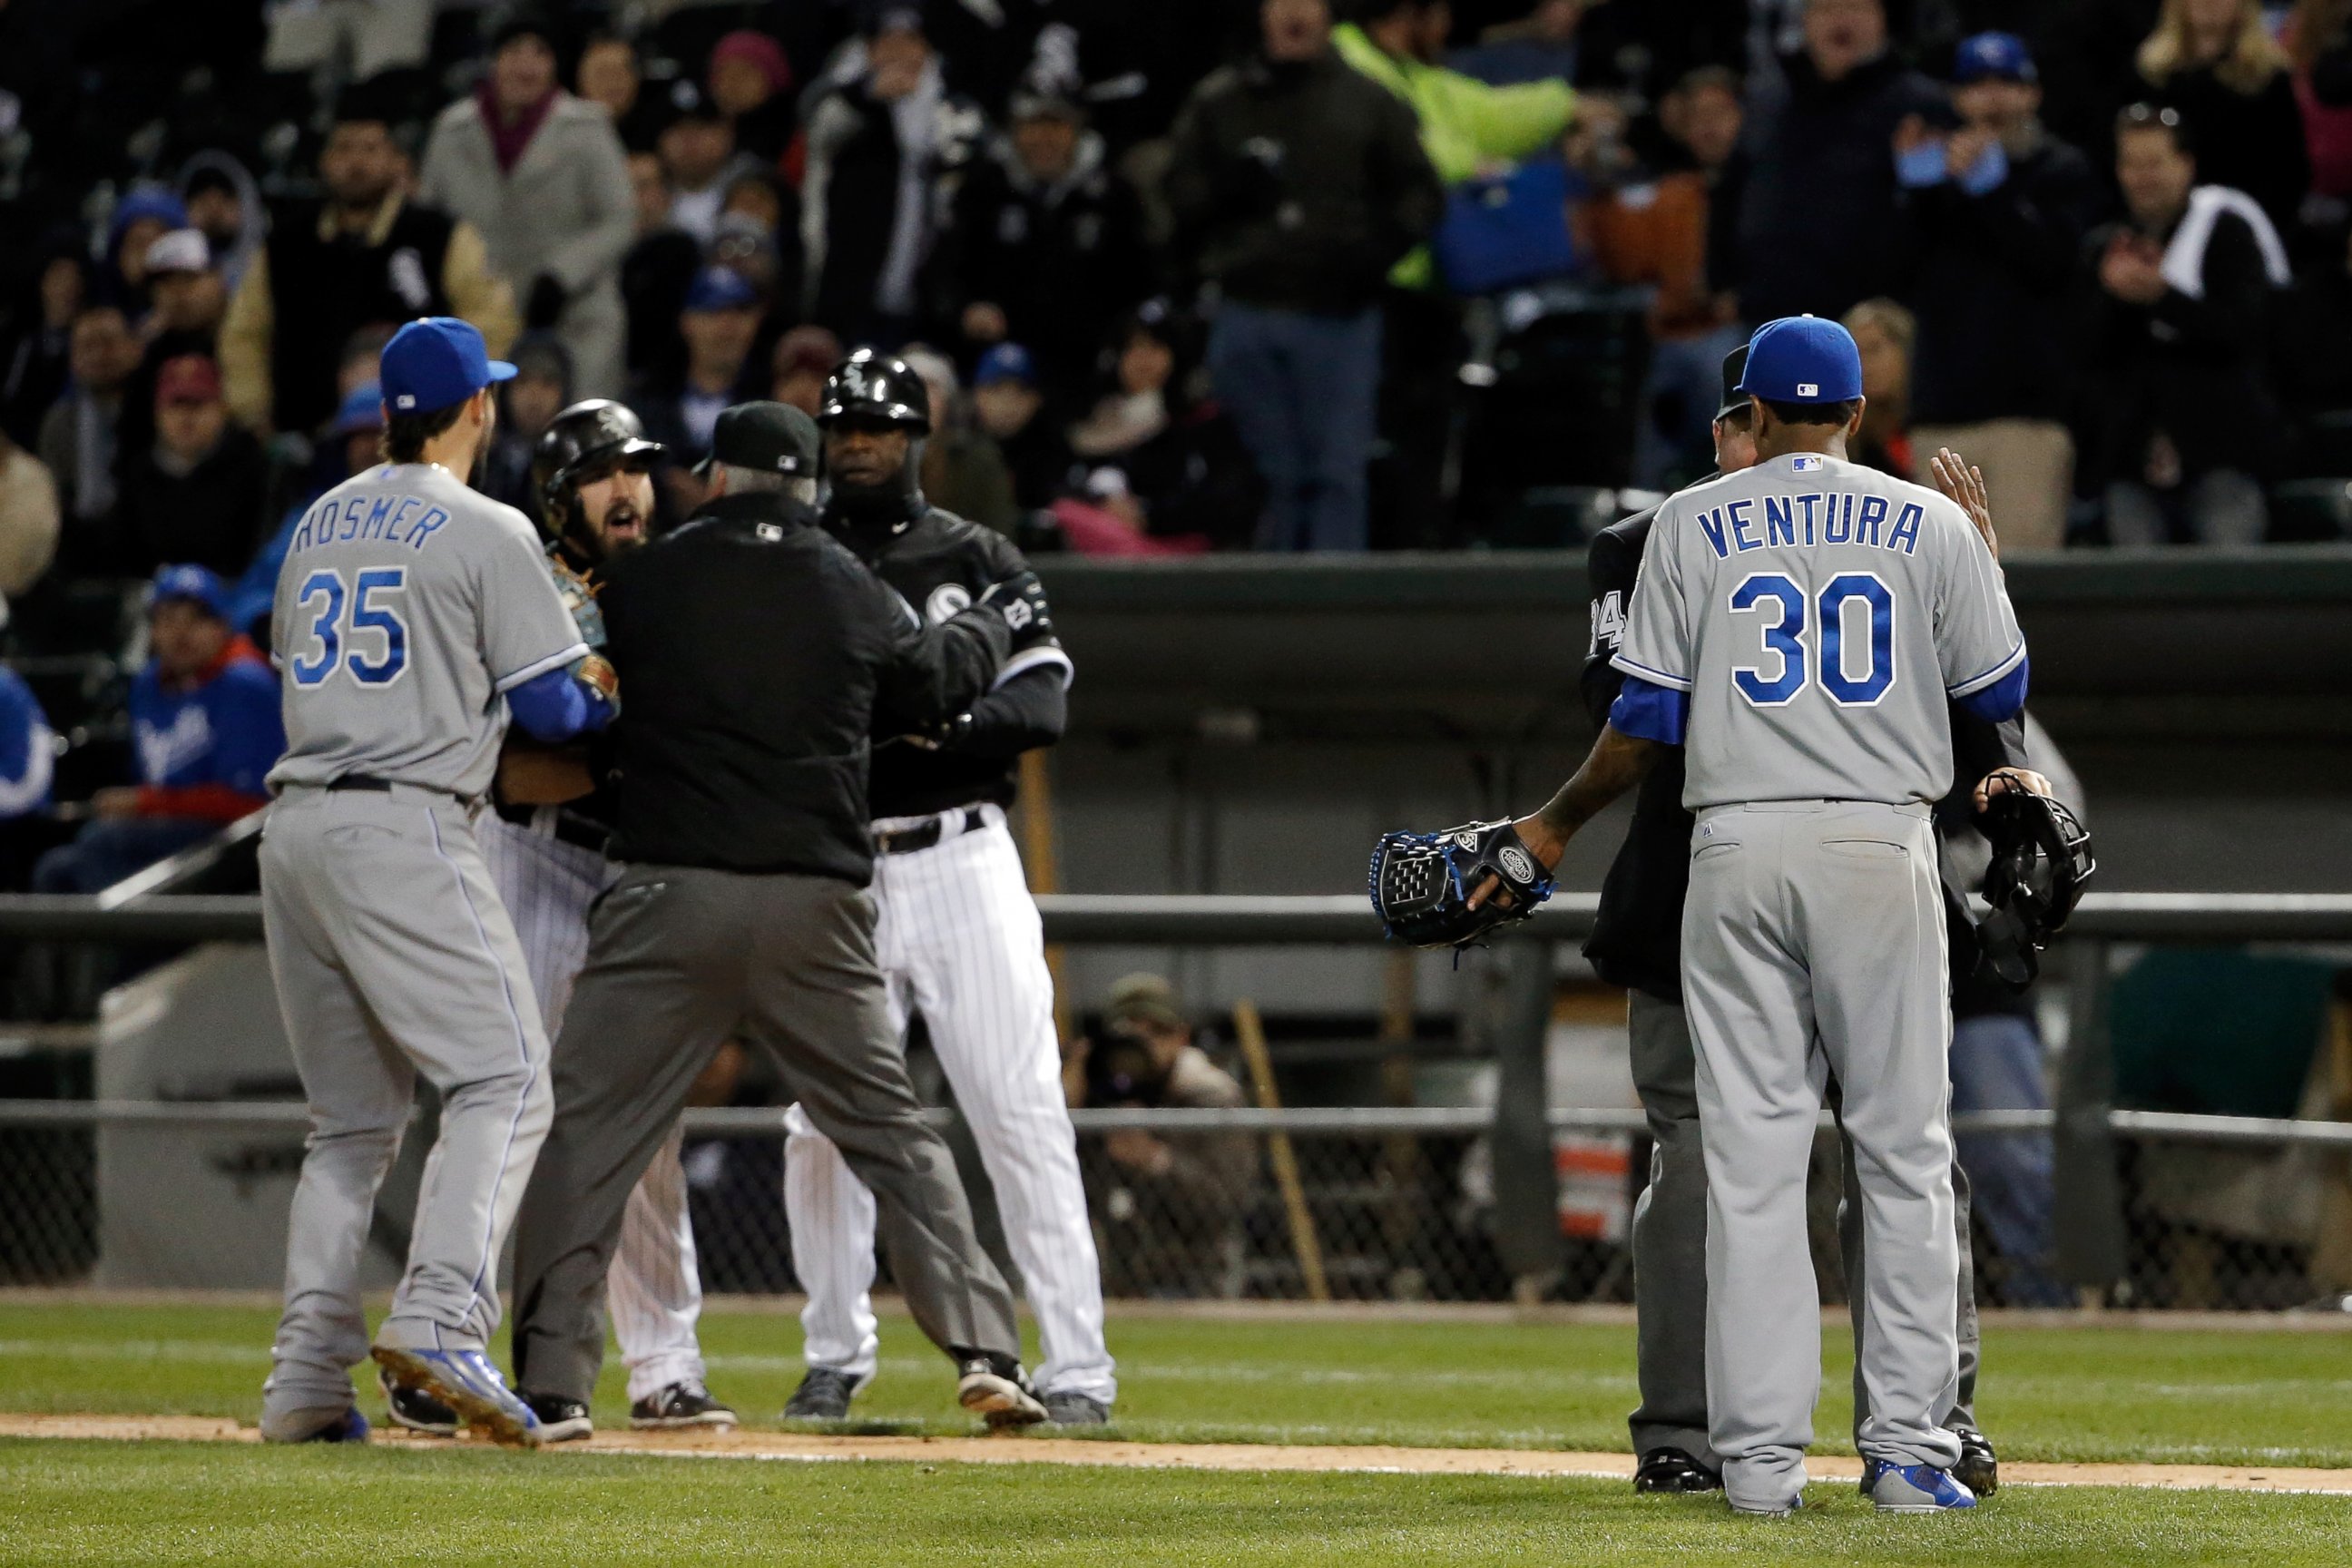 PHOTO: Yordano Ventura of the Kansas City Royals talks to umpire Sam Holbrook Adam Eaton of the Chicago White Sox is restrained during the seventh inning on April 23, 2015 at U.S. Cellular Field in Chicago, Illinois.